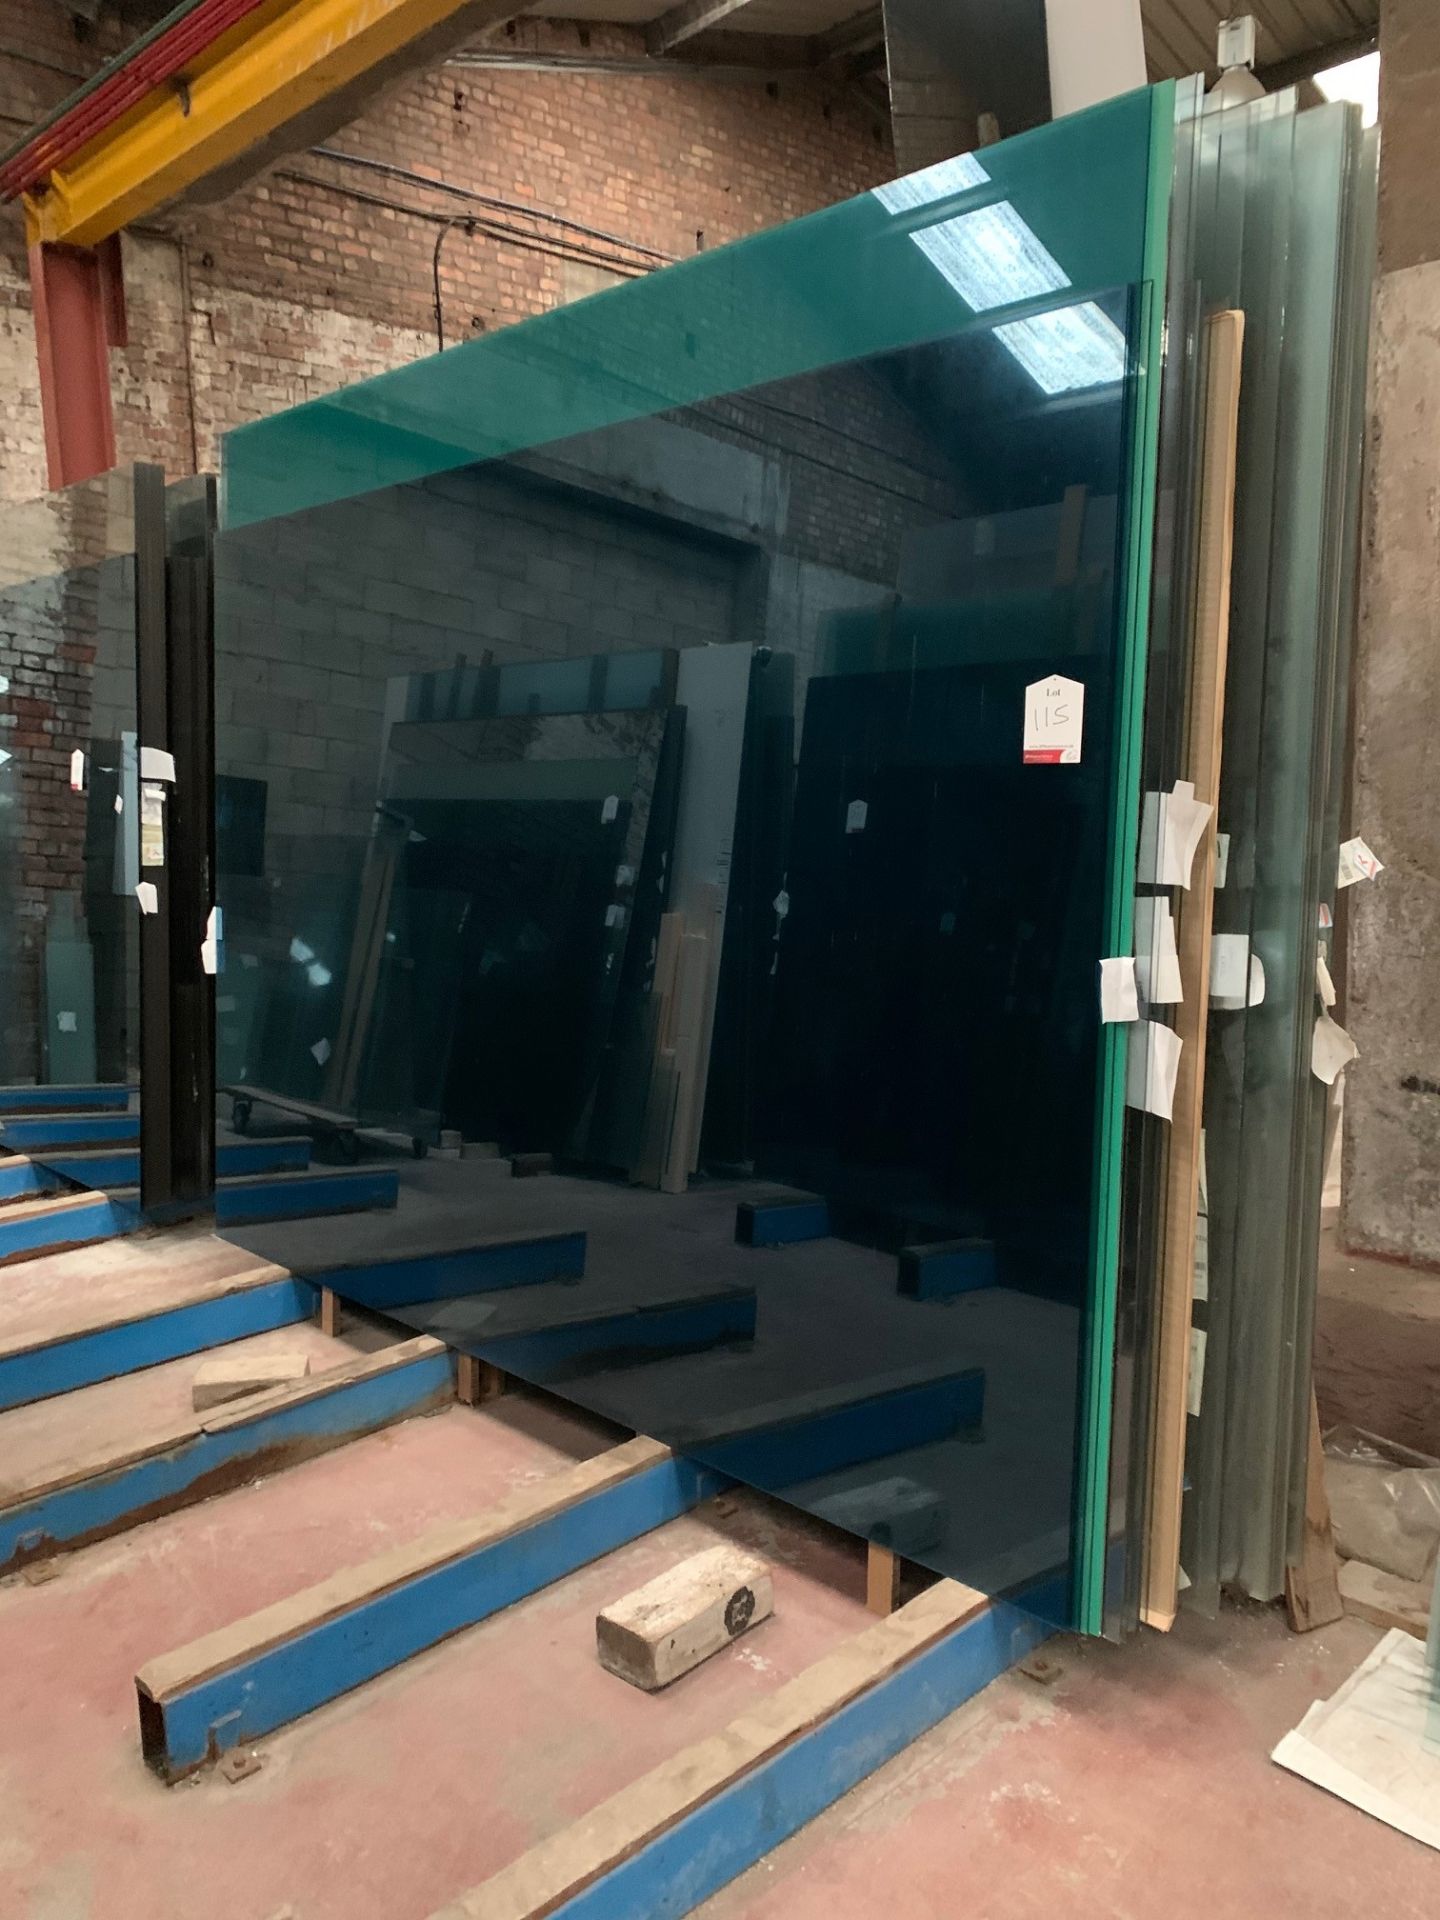 Quantity of Large Glass Sheets - Cover 9 Stillages